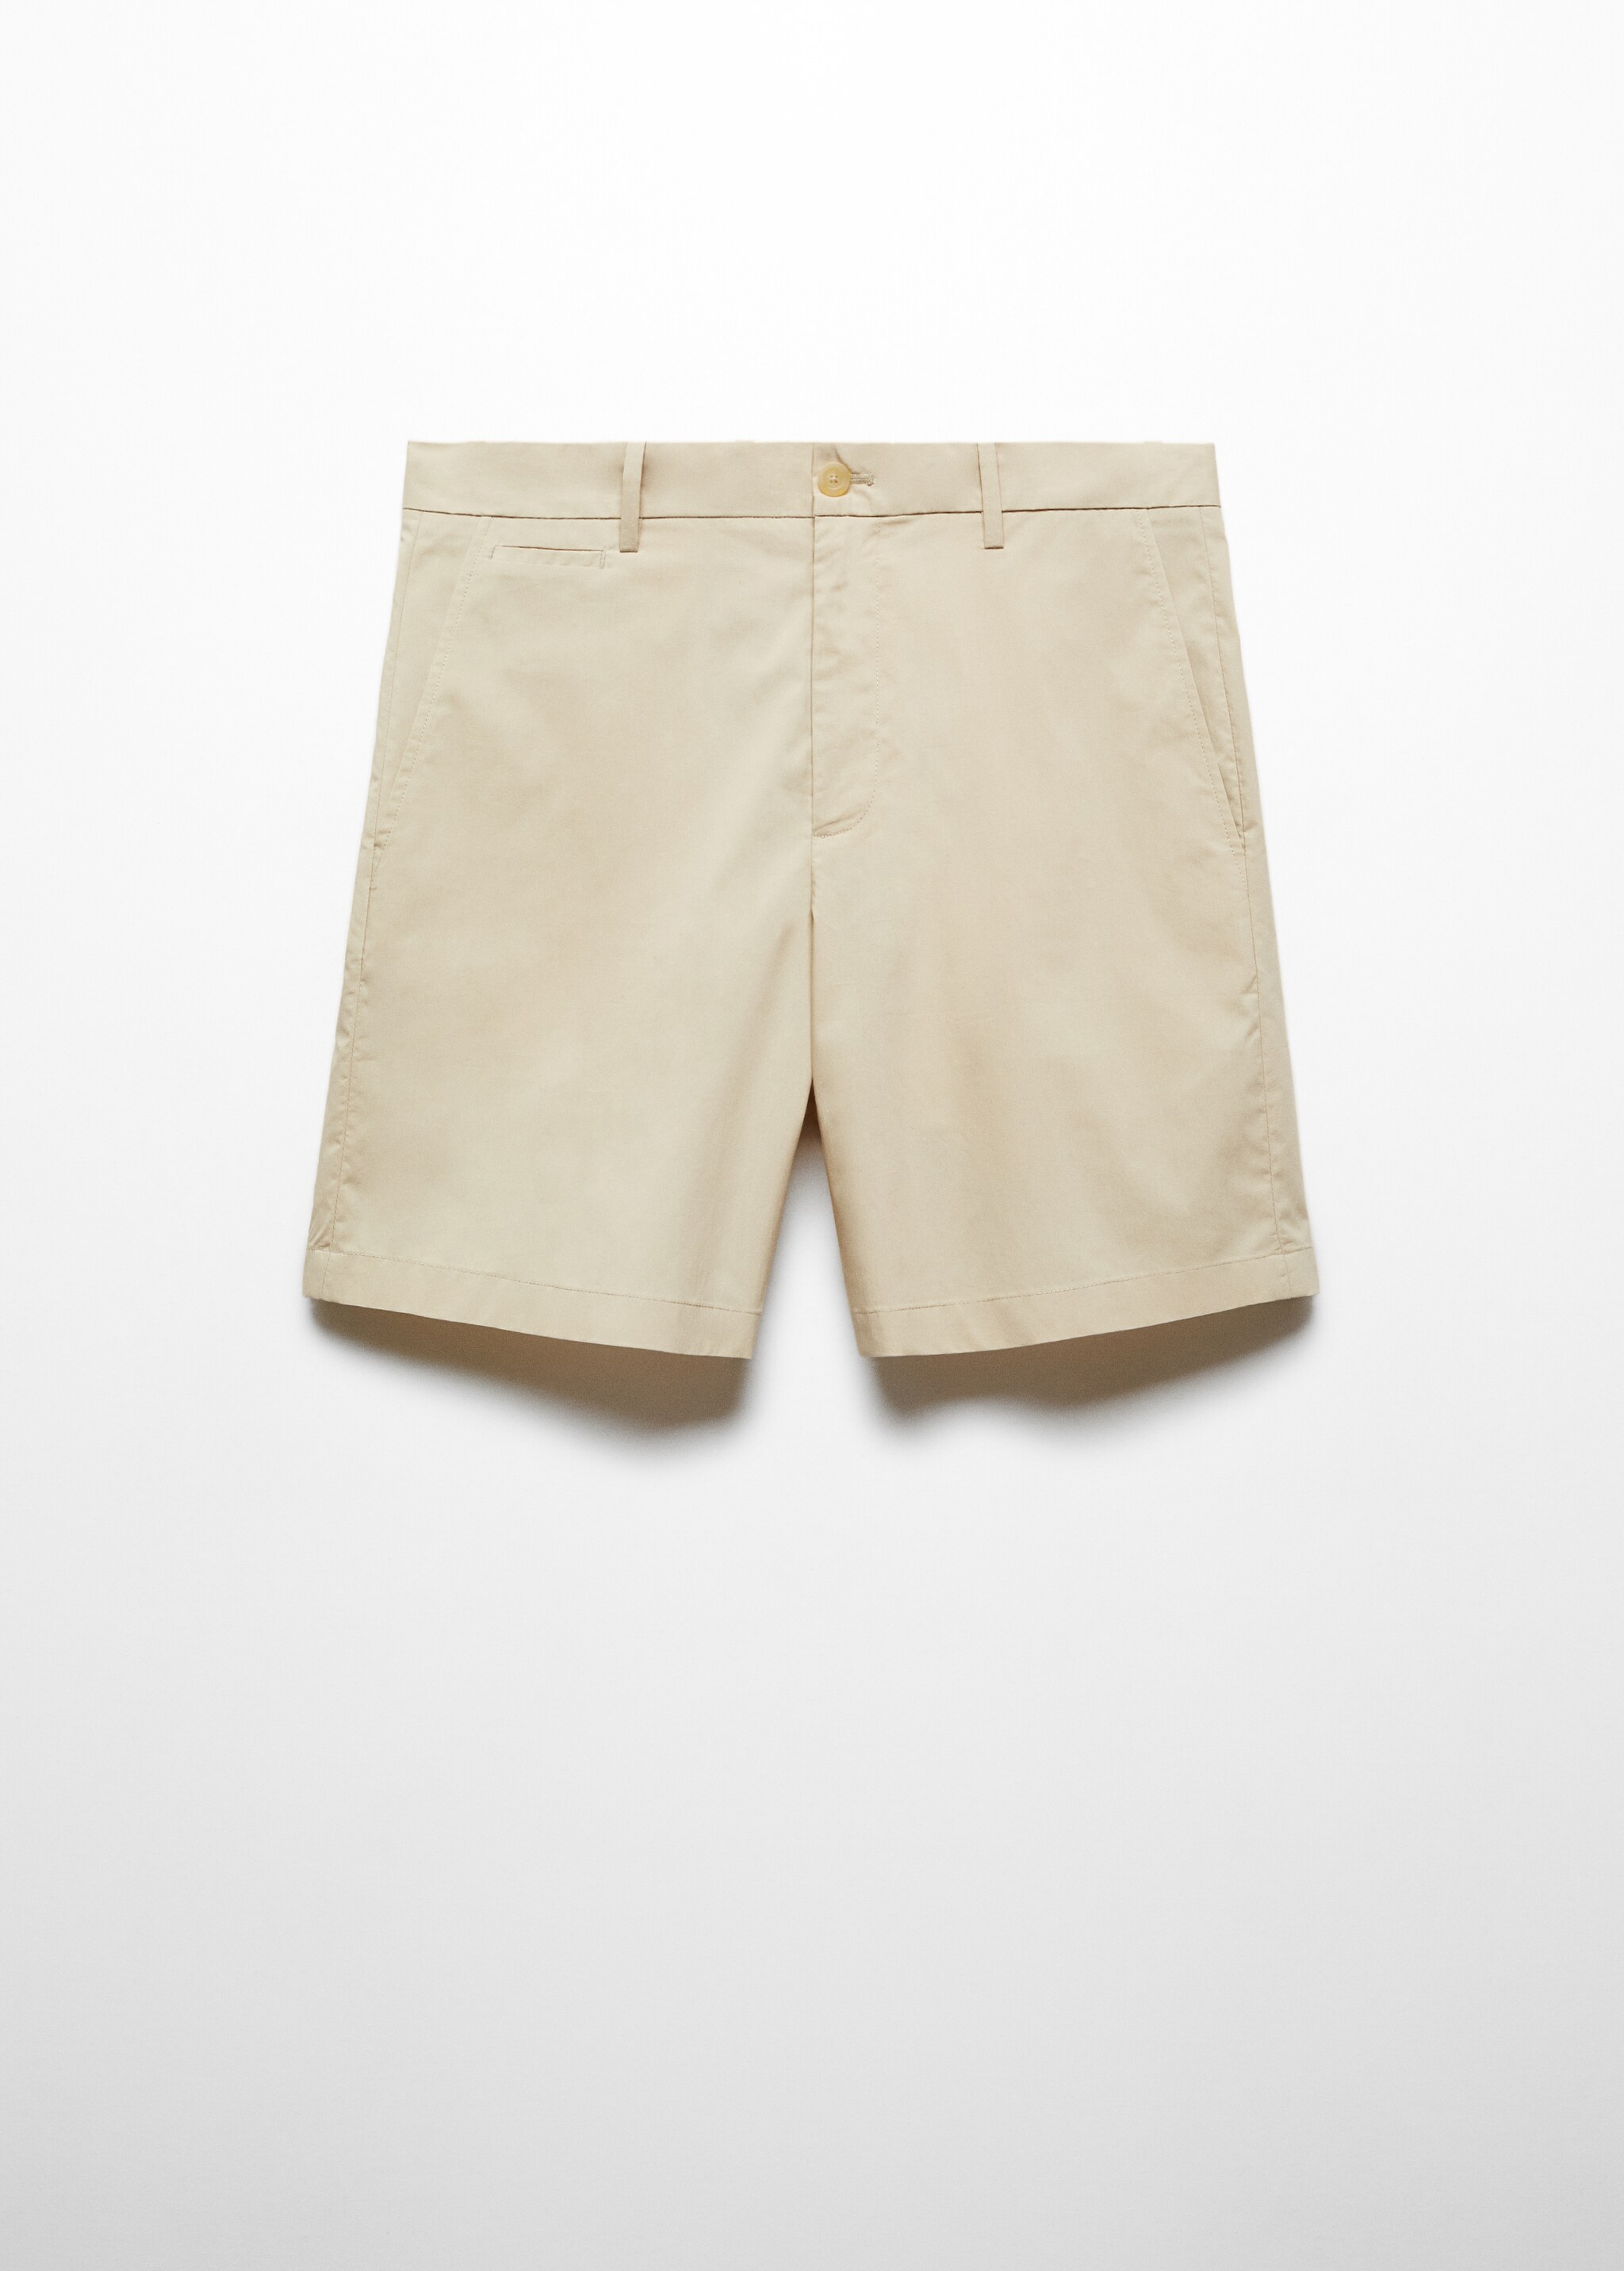 Slim fit cotton Bermuda shorts - Article without model